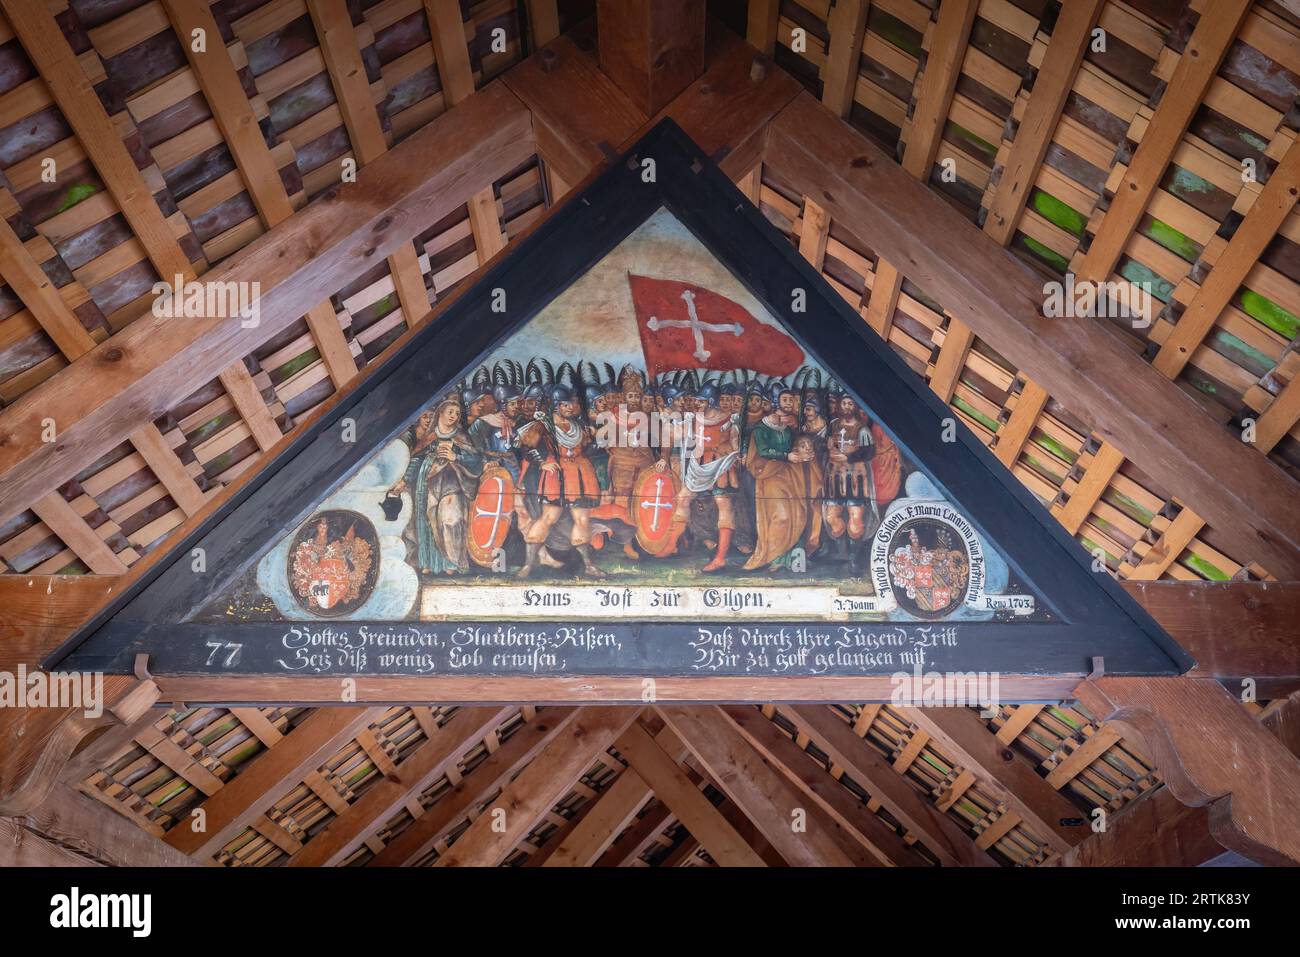 Theban Legion with Verena and Regula - Painting depicting events from Lucerne history at Chapel Bridge (Kapellbrucke) - Lucerne, Switzerland Stock Photo